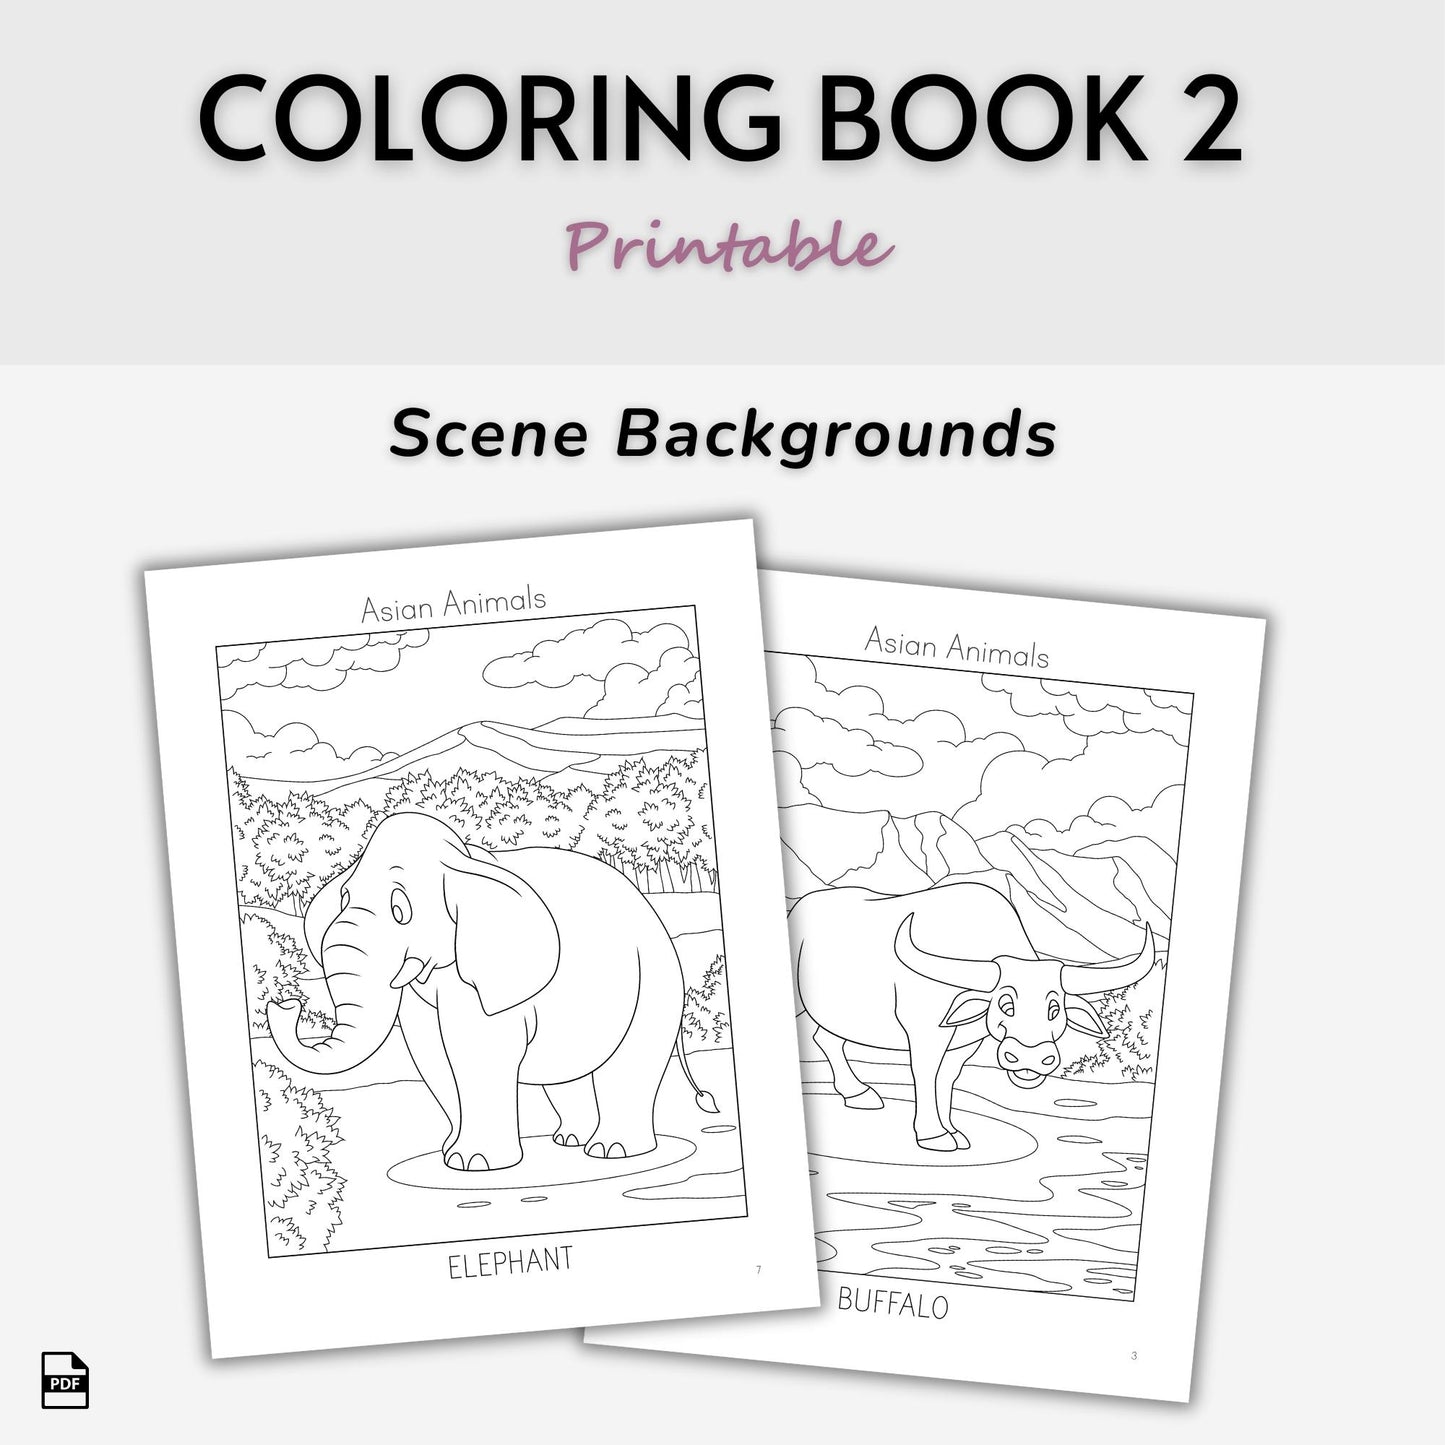 Asian Animals Coloring Books